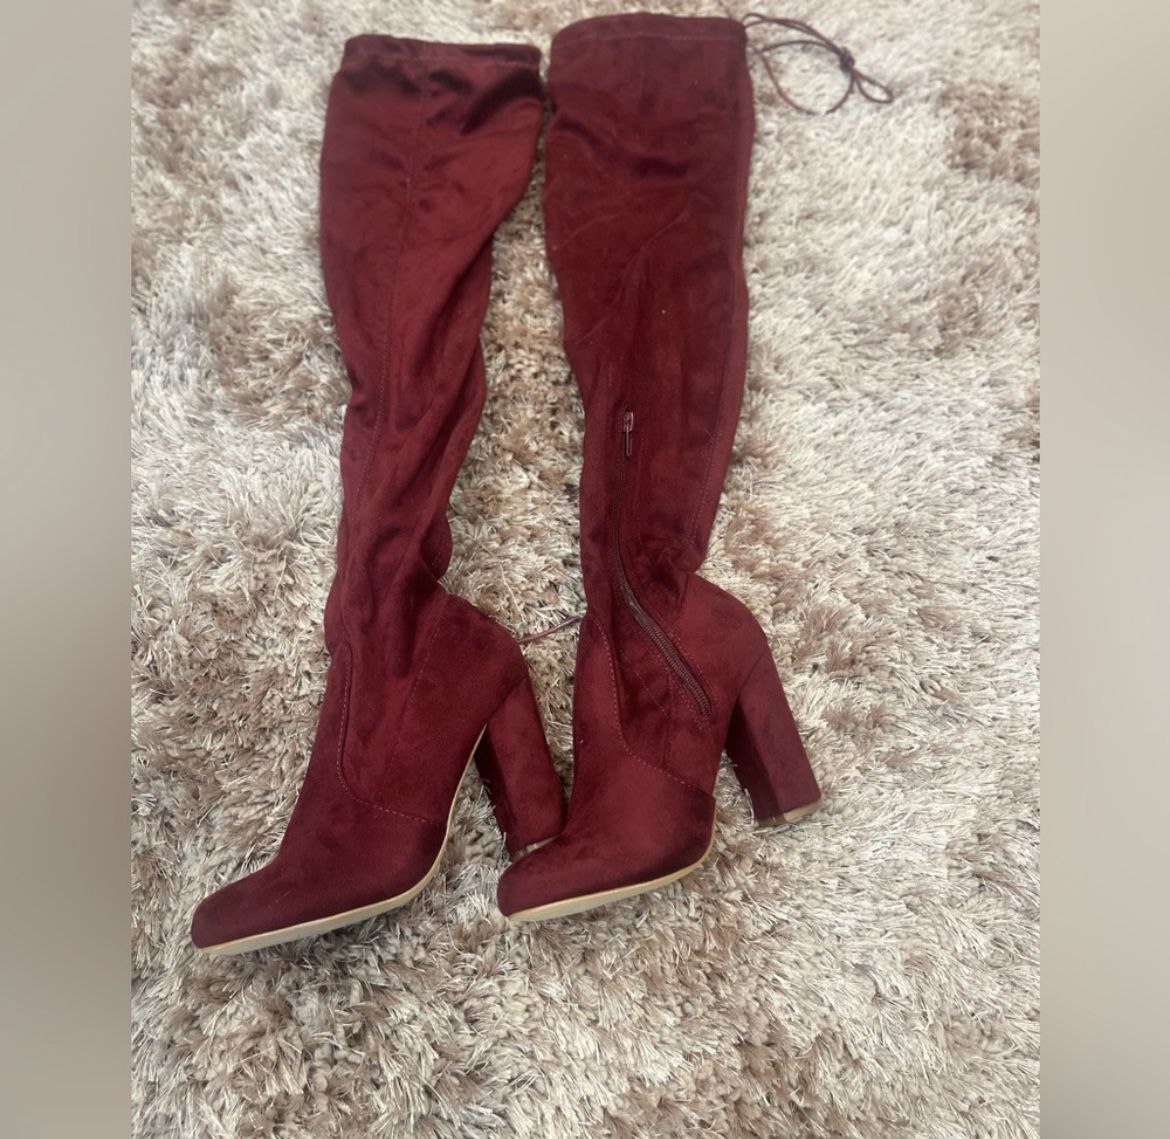 Thigh High Boots , Accepting Offers ! 